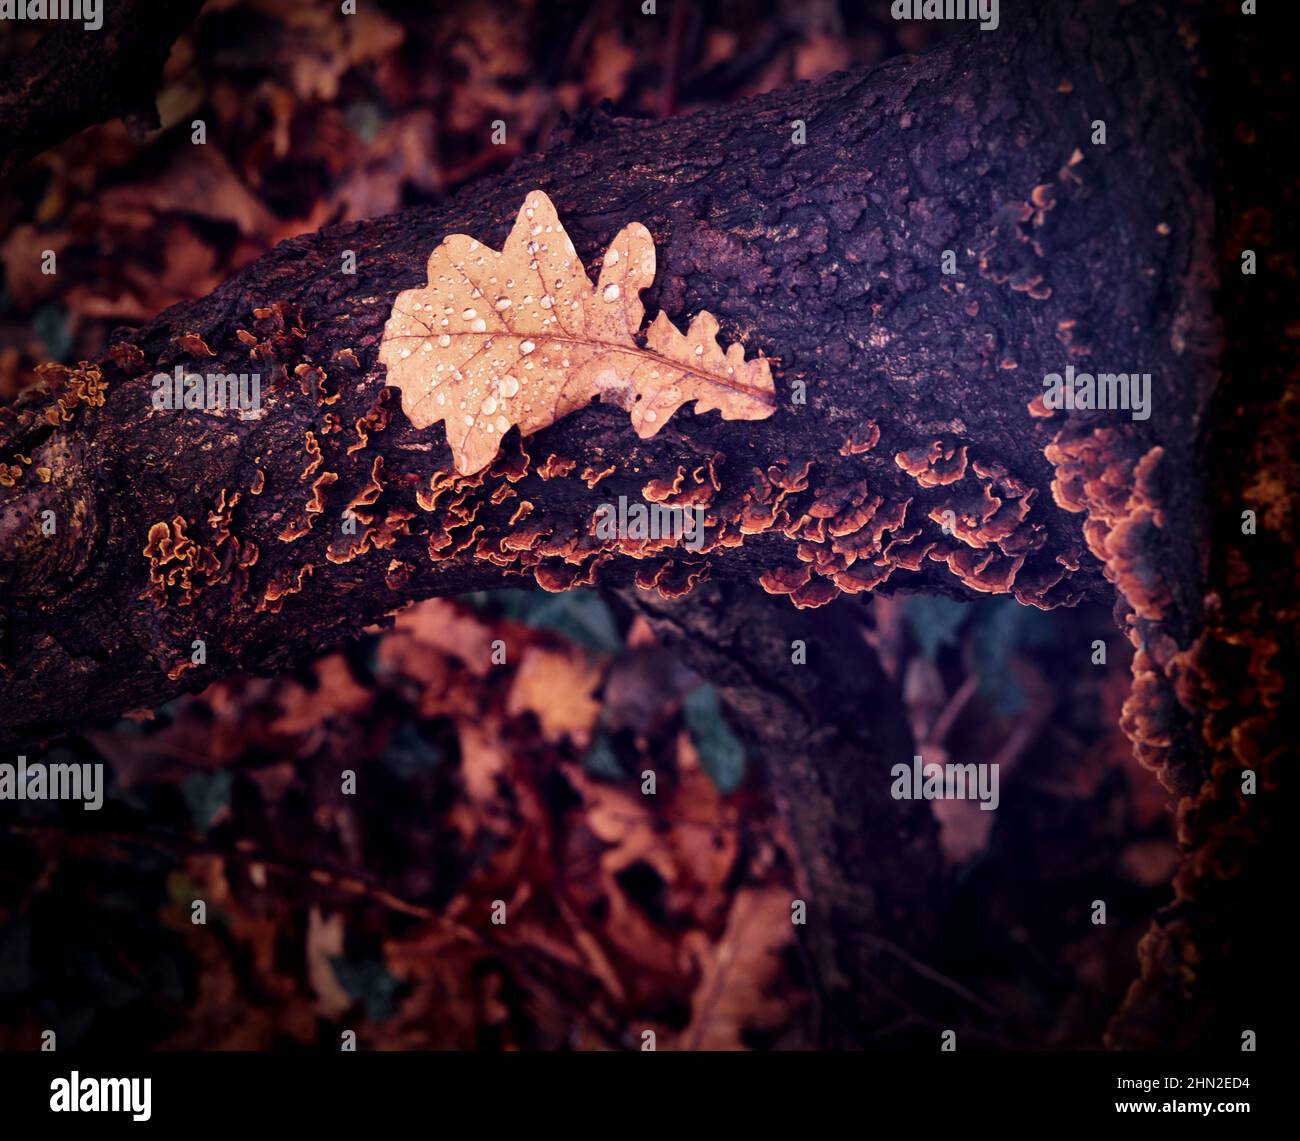 Close-up natural environmental still-life of fallen leaves against a woodland floor background Stock Photo